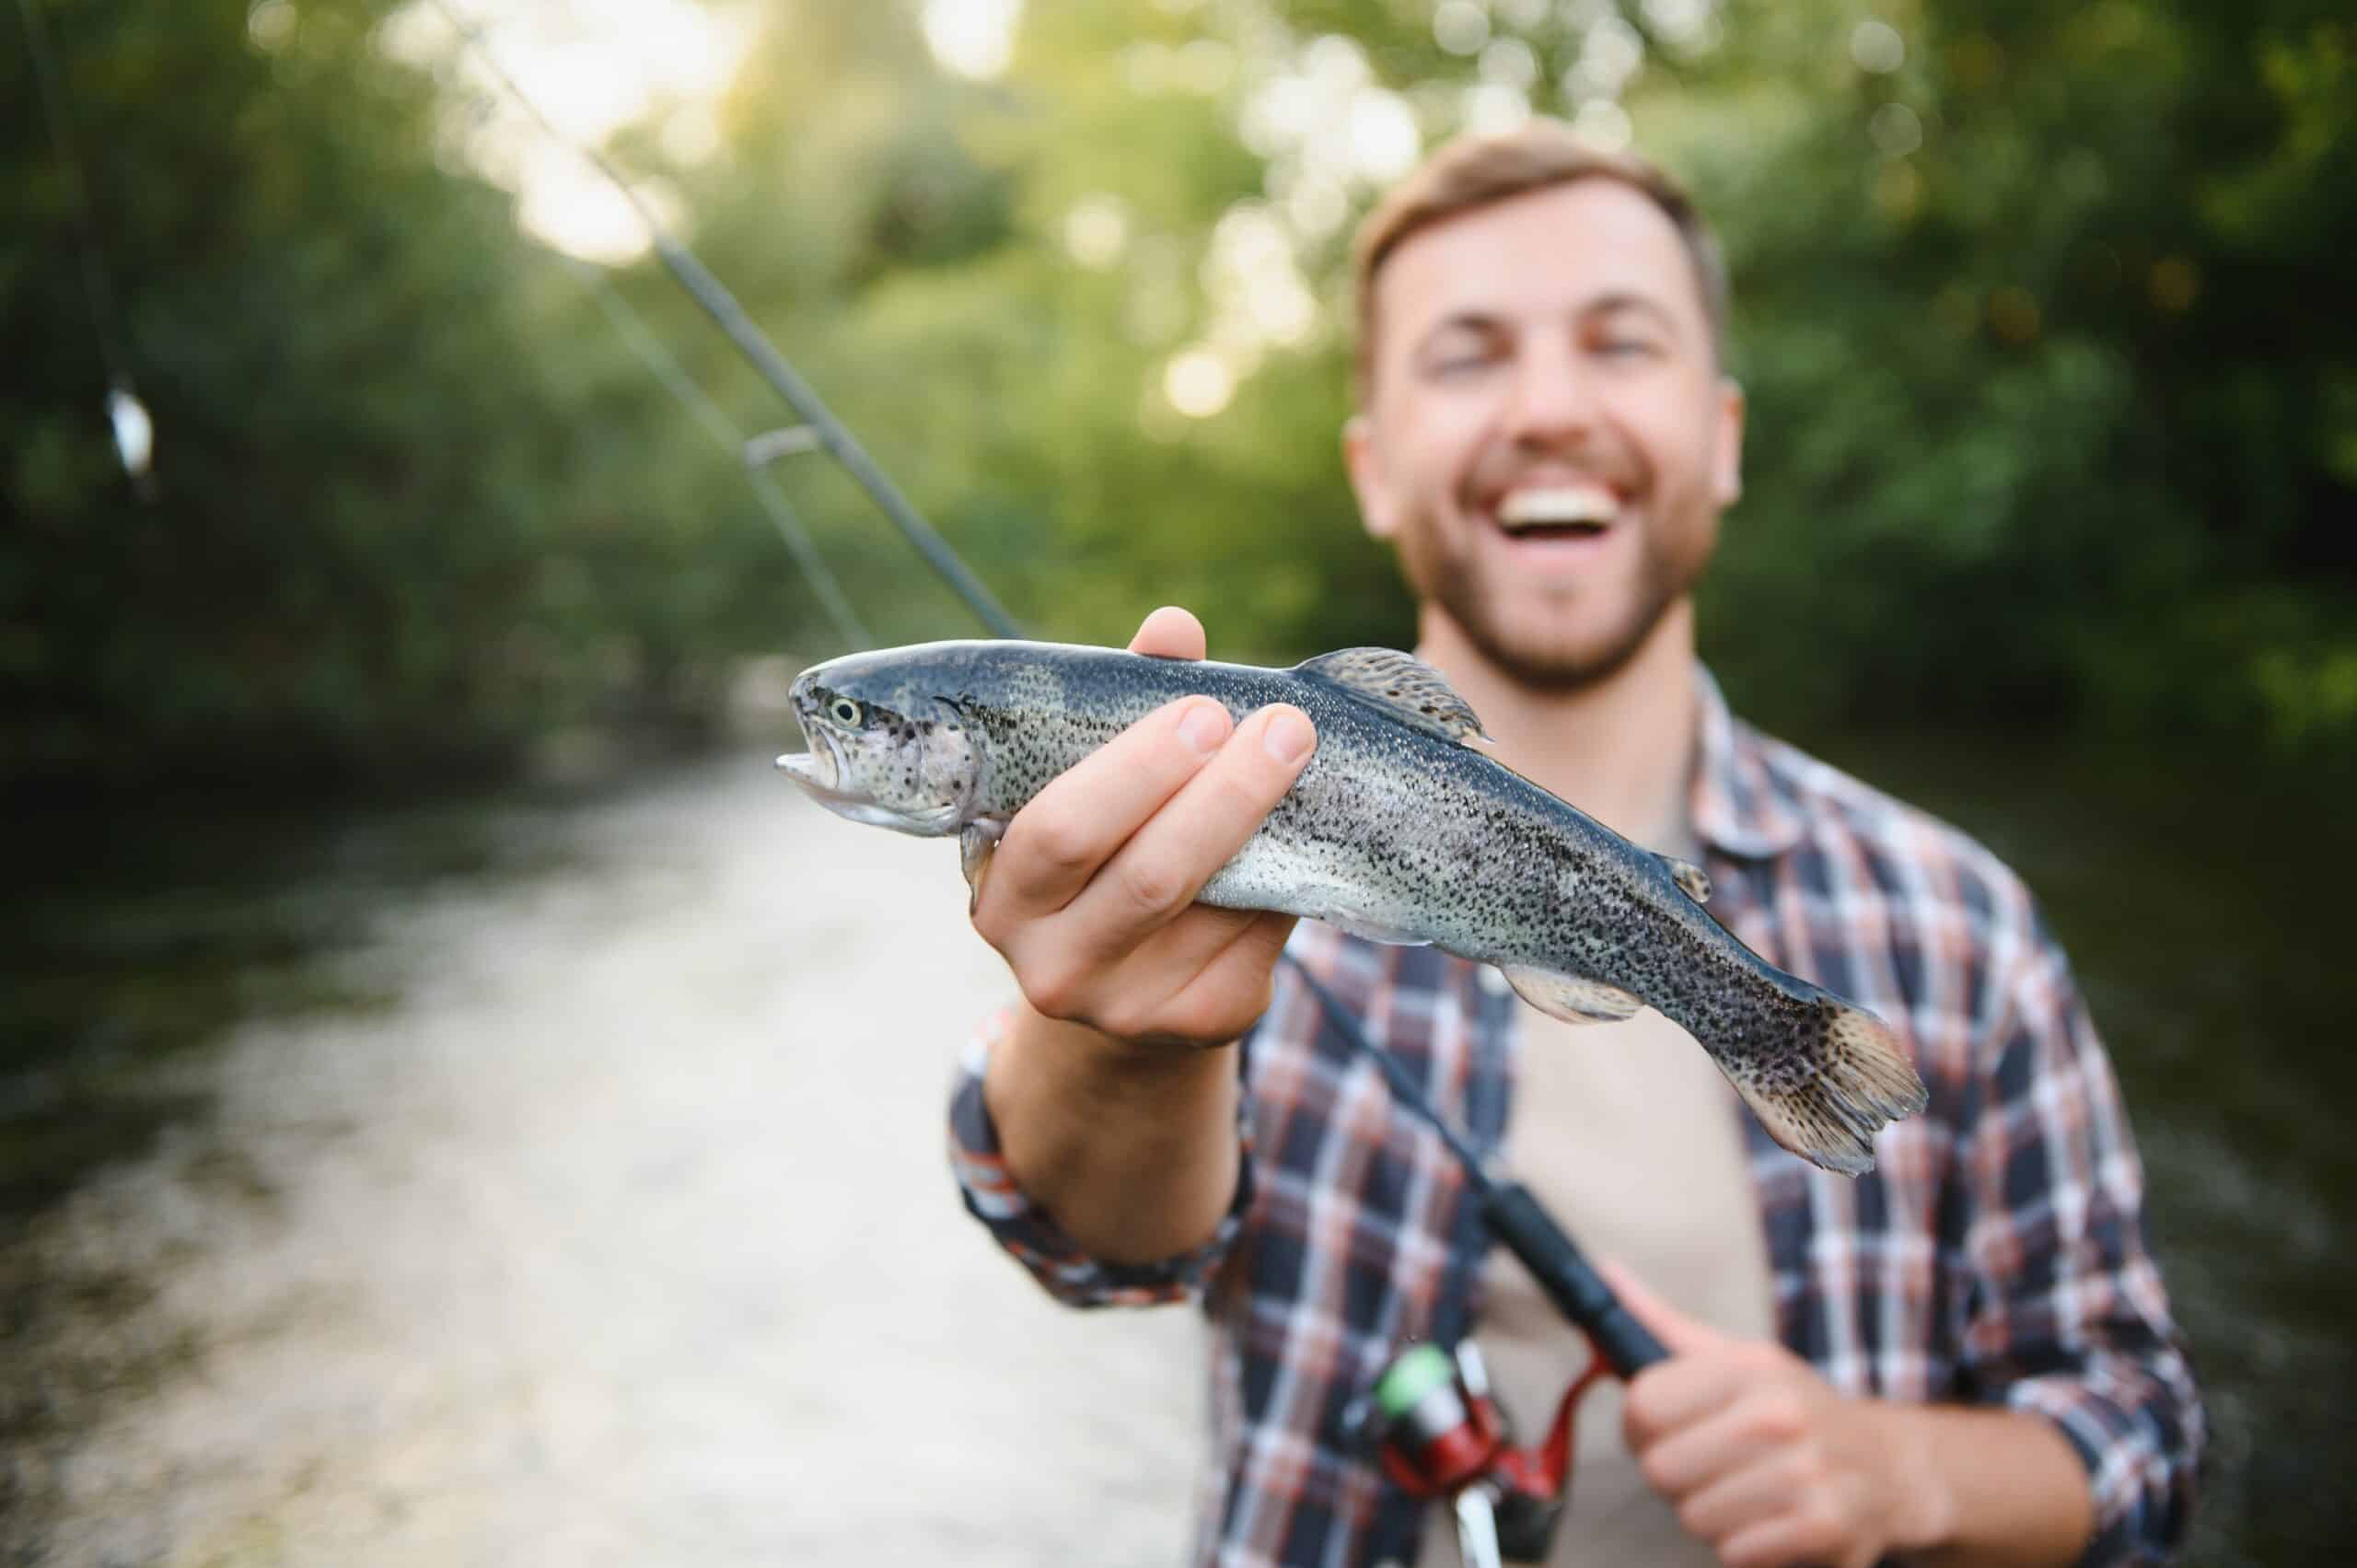 fanatic4fishing.com : What fish to catch for beginners?